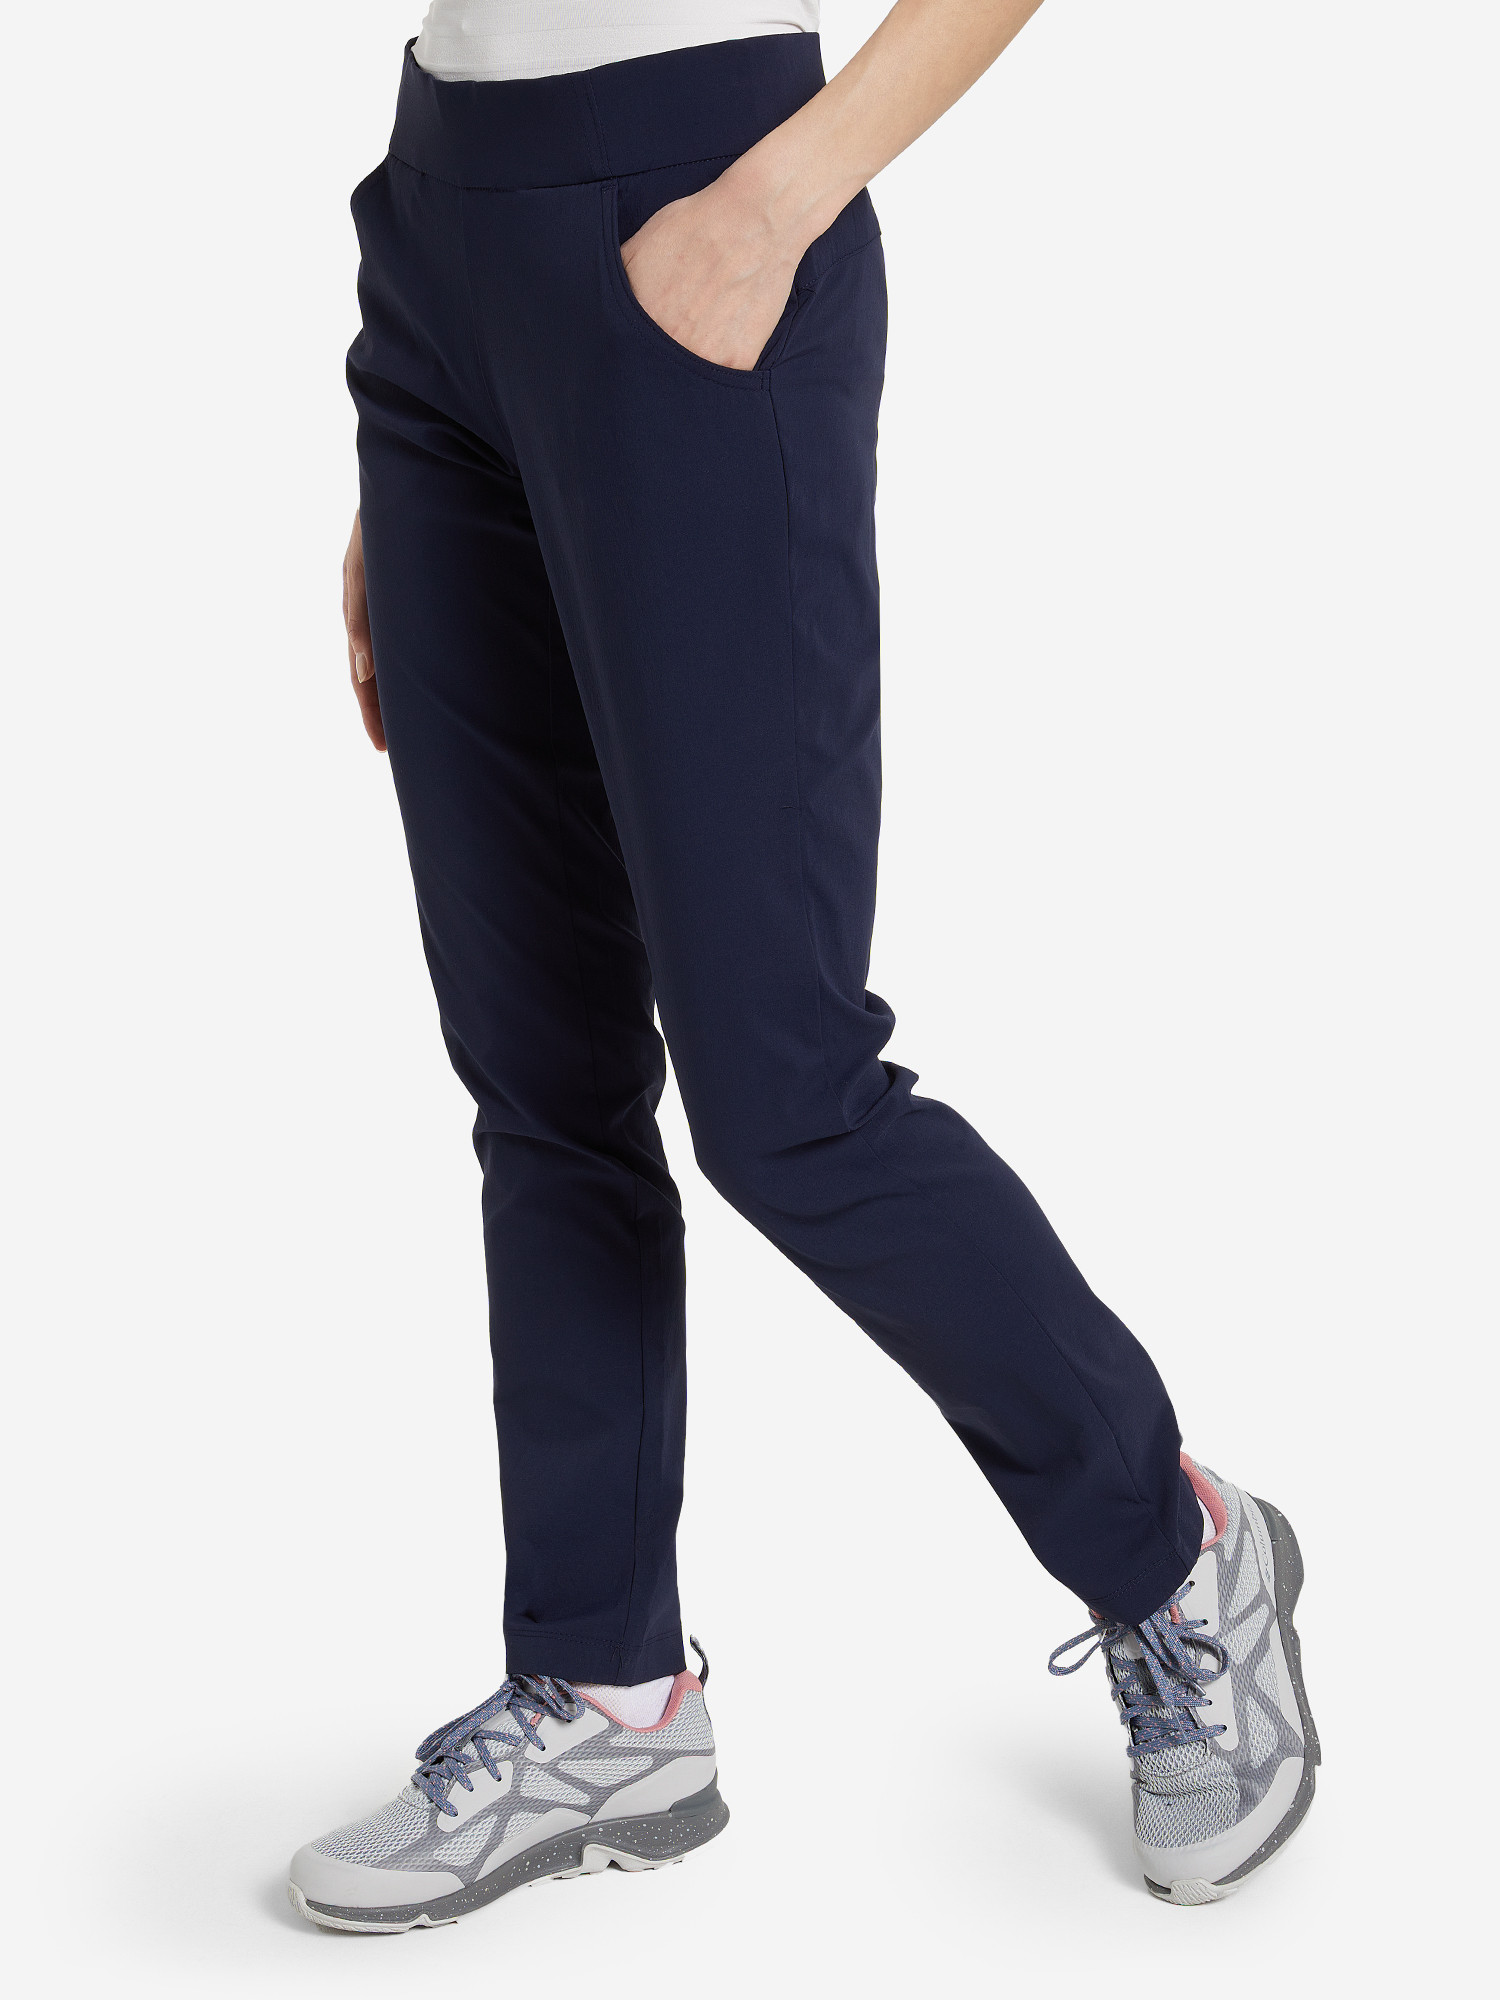 Брюки женские Columbia Anytime Casual Pull On Pant